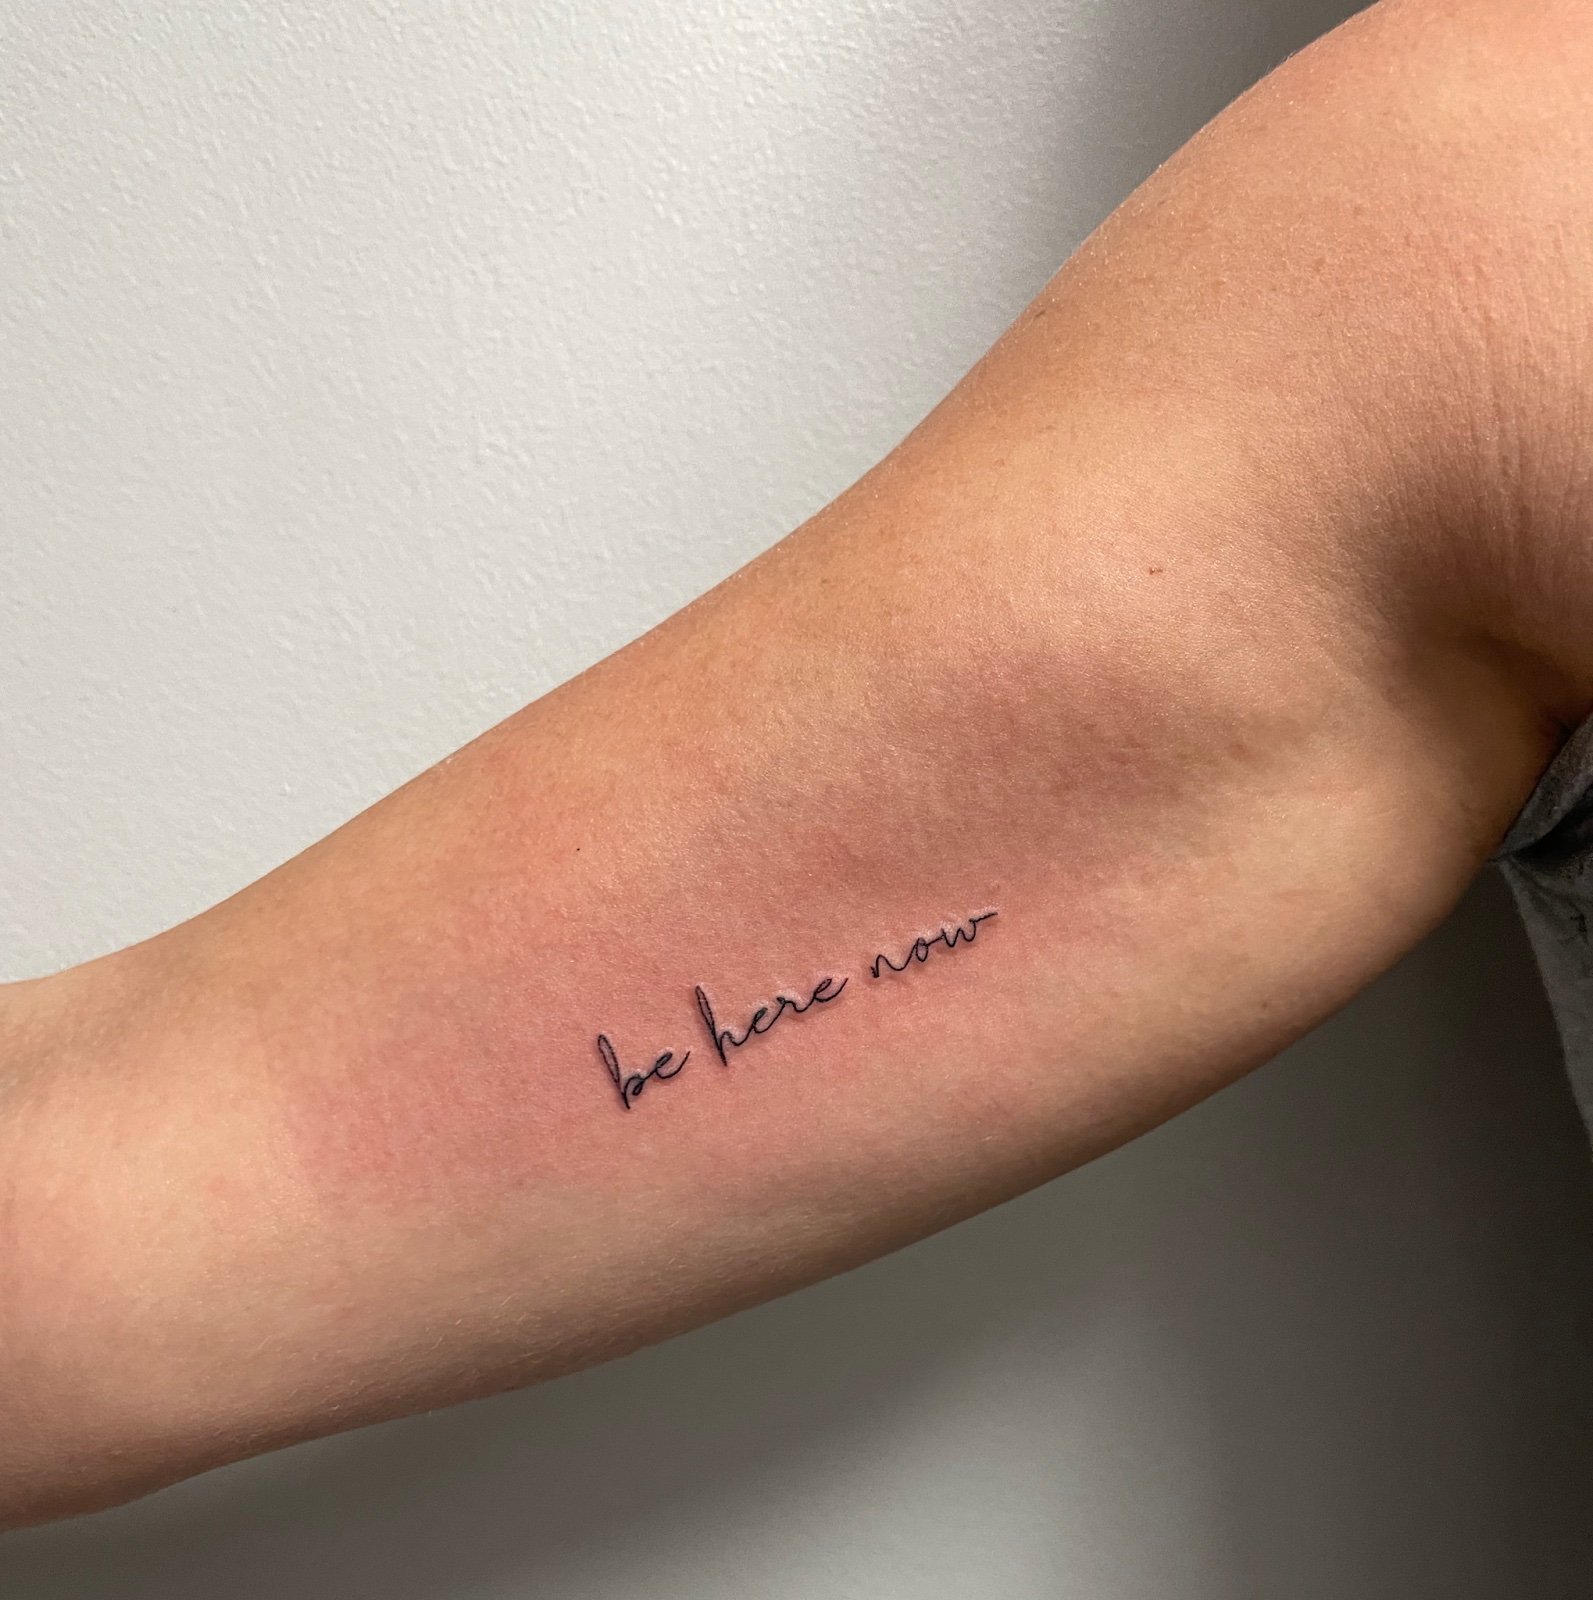 21 Minimalist And Small Tattoo Designs With Meanings